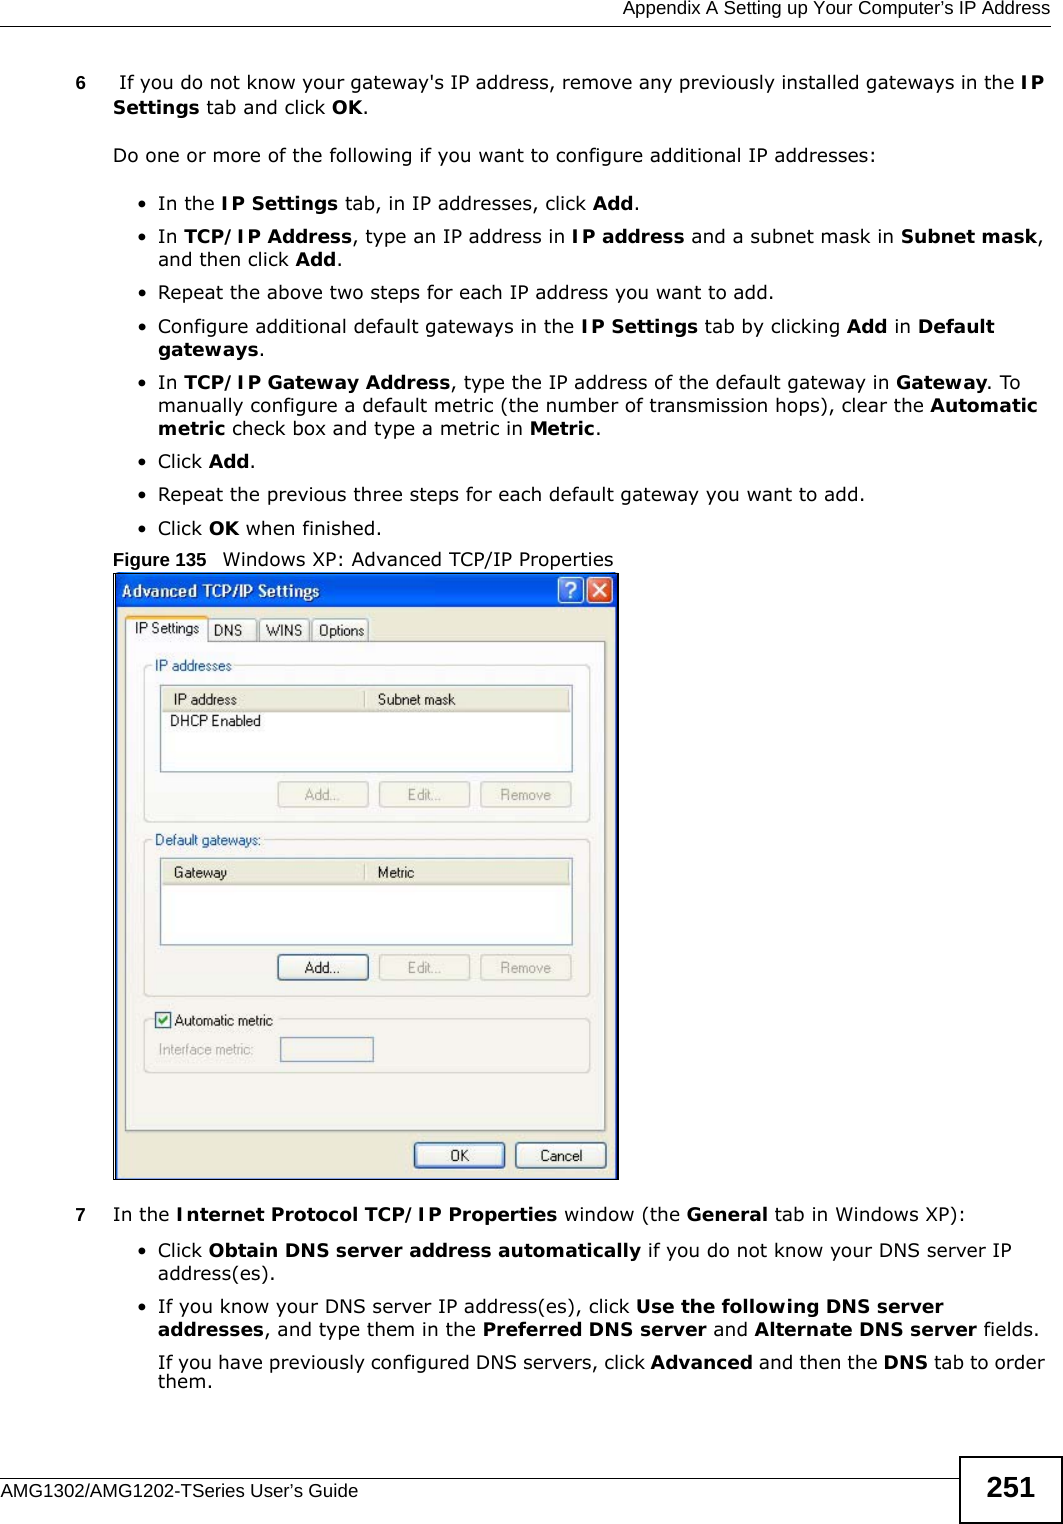  Appendix A Setting up Your Computer’s IP AddressAMG1302/AMG1202-TSeries User’s Guide 2516 If you do not know your gateway&apos;s IP address, remove any previously installed gateways in the IP Settings tab and click OK.Do one or more of the following if you want to configure additional IP addresses:•In the IP Settings tab, in IP addresses, click Add.•In TCP/IP Address, type an IP address in IP address and a subnet mask in Subnet mask, and then click Add.• Repeat the above two steps for each IP address you want to add.• Configure additional default gateways in the IP Settings tab by clicking Add in Default gateways.•In TCP/IP Gateway Address, type the IP address of the default gateway in Gateway. To manually configure a default metric (the number of transmission hops), clear the Automatic metric check box and type a metric in Metric.• Click Add. • Repeat the previous three steps for each default gateway you want to add.• Click OK when finished.Figure 135   Windows XP: Advanced TCP/IP Properties7In the Internet Protocol TCP/IP Properties window (the General tab in Windows XP):• Click Obtain DNS server address automatically if you do not know your DNS server IP address(es).• If you know your DNS server IP address(es), click Use the following DNS server addresses, and type them in the Preferred DNS server and Alternate DNS server fields. If you have previously configured DNS servers, click Advanced and then the DNS tab to order them.